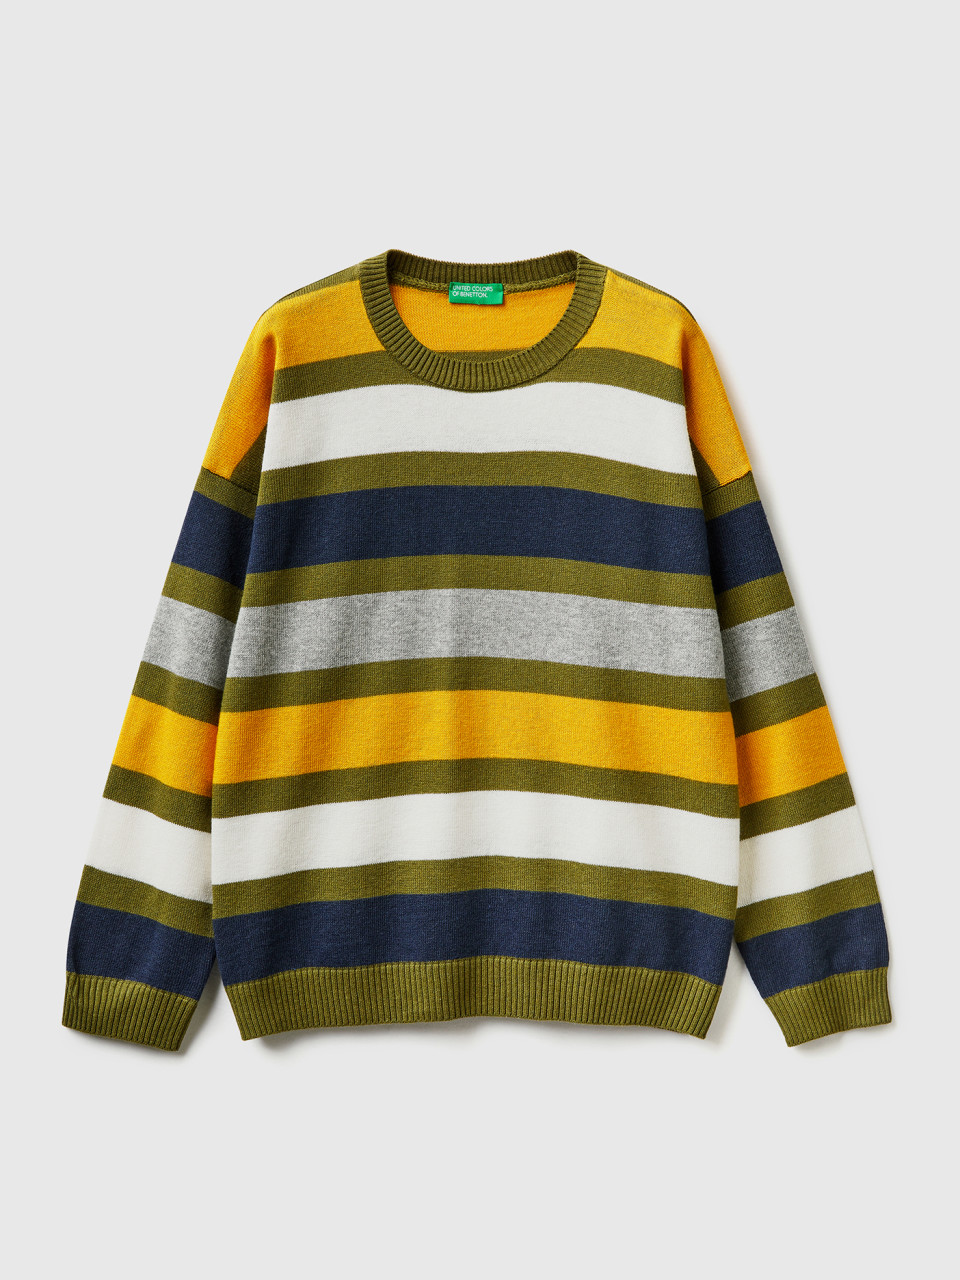 Benetton, Striped Sweater In Wool And Cotton Blend, Multi-color, Kids